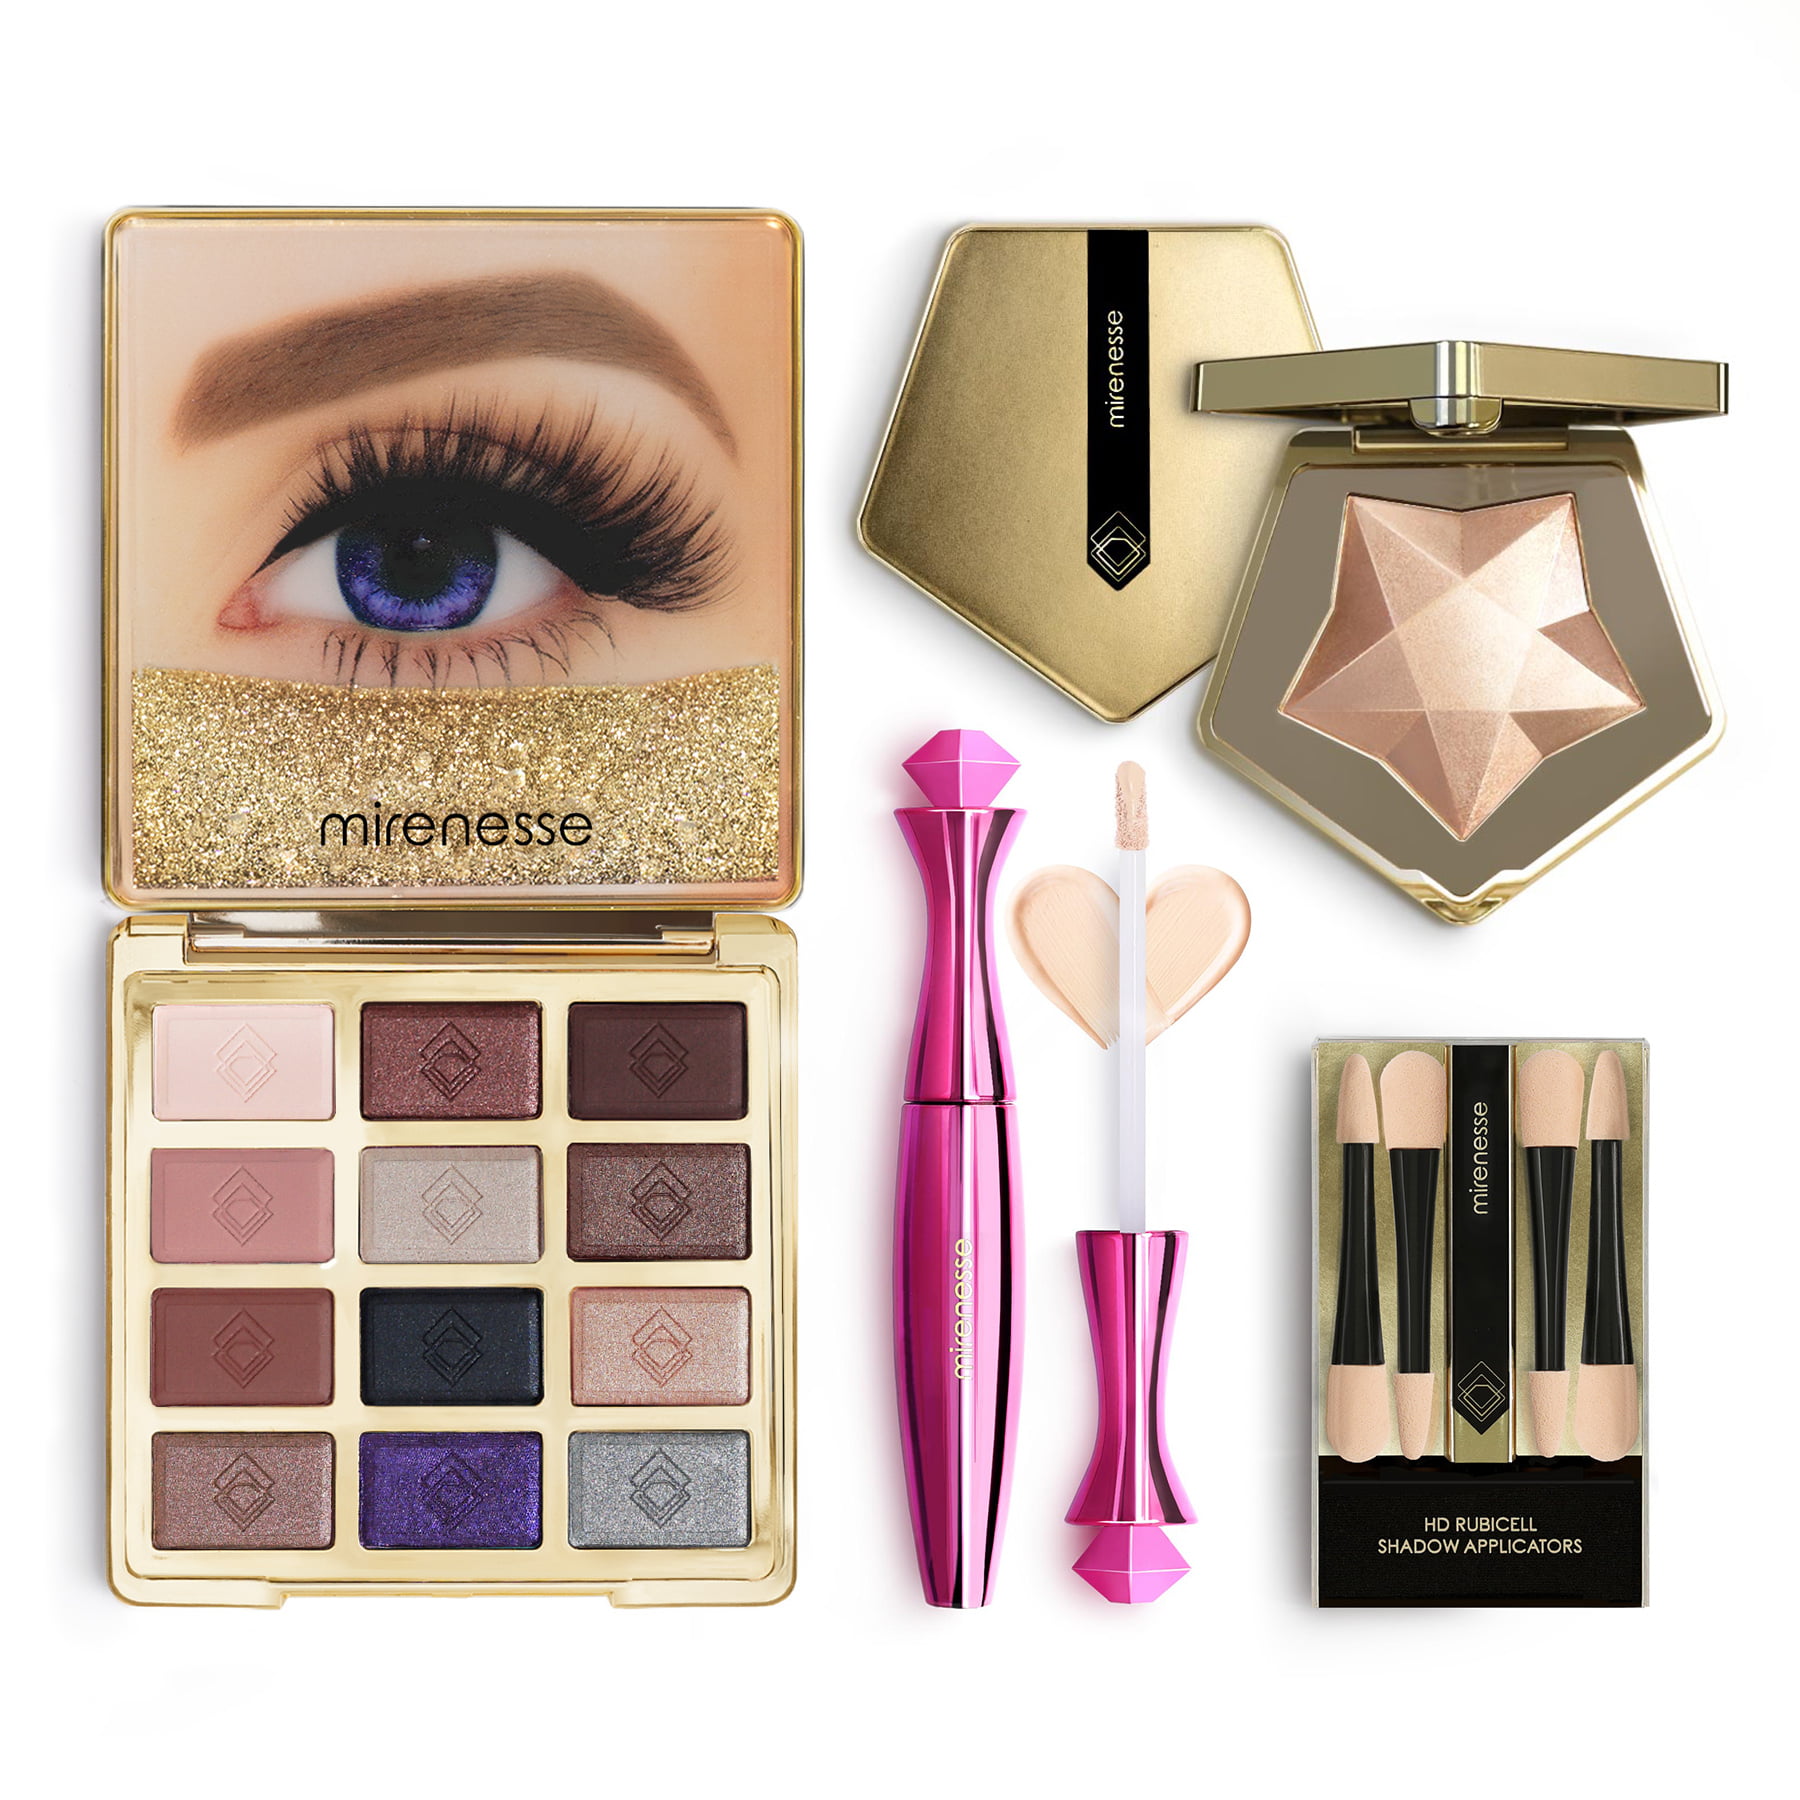 Coffret Maquillage Nude Perfection